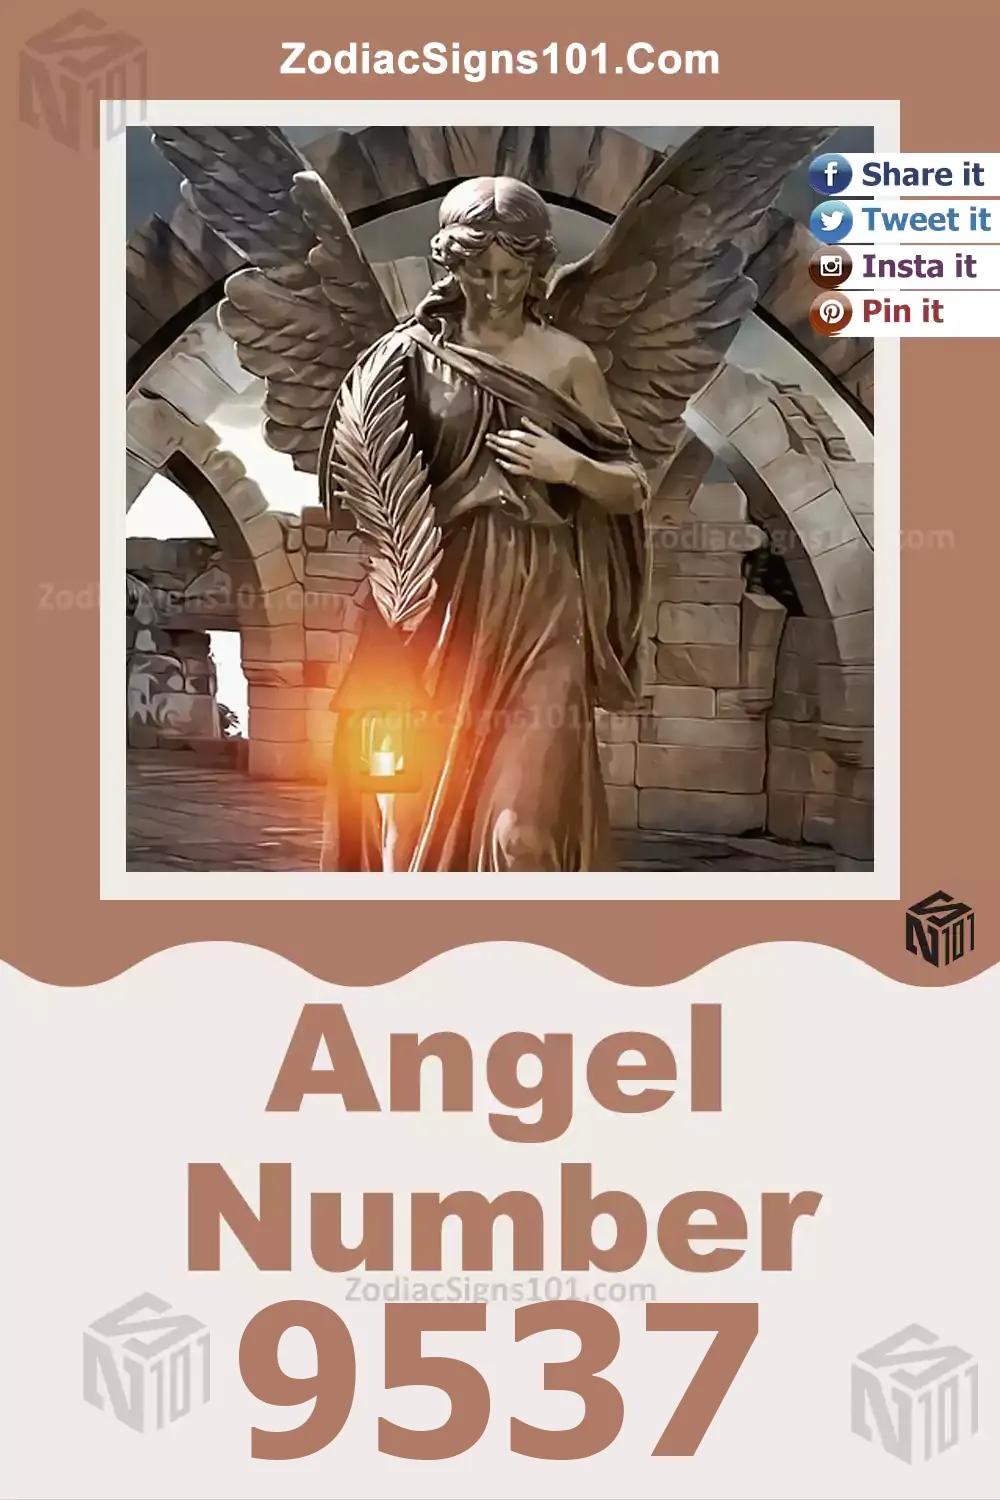 9537 Angel Number Meaning